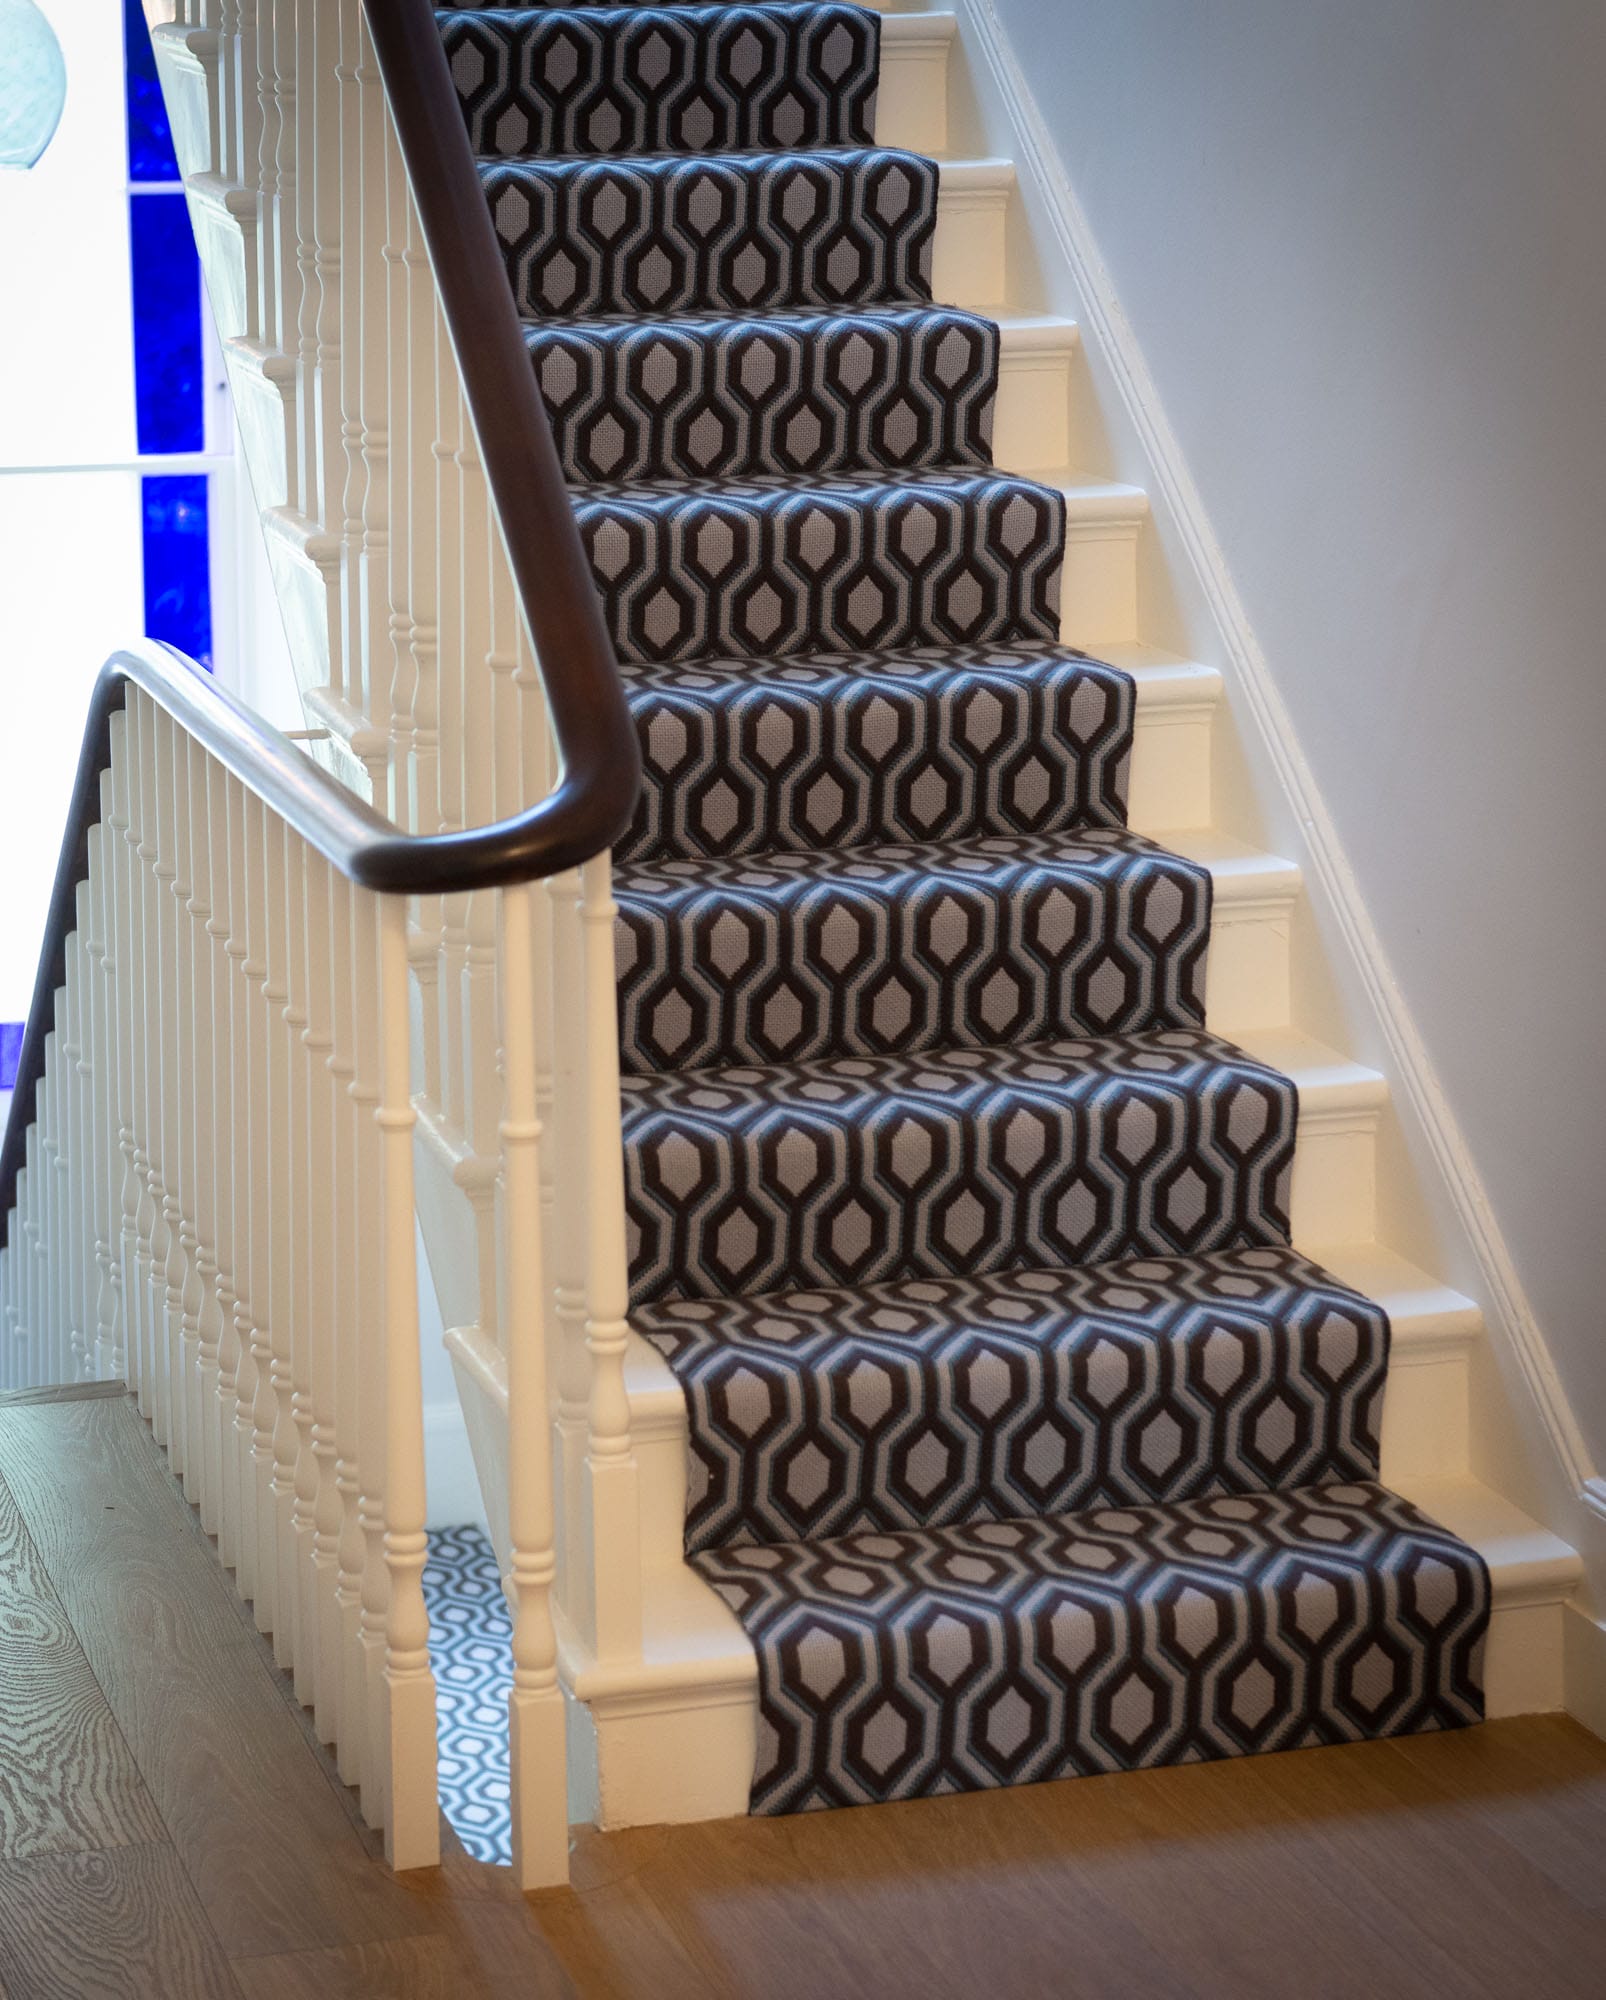 Details about  / Stripe Stair Carpets Extra Long Wide Hall Runners Very Narrow For Stairways Rugs